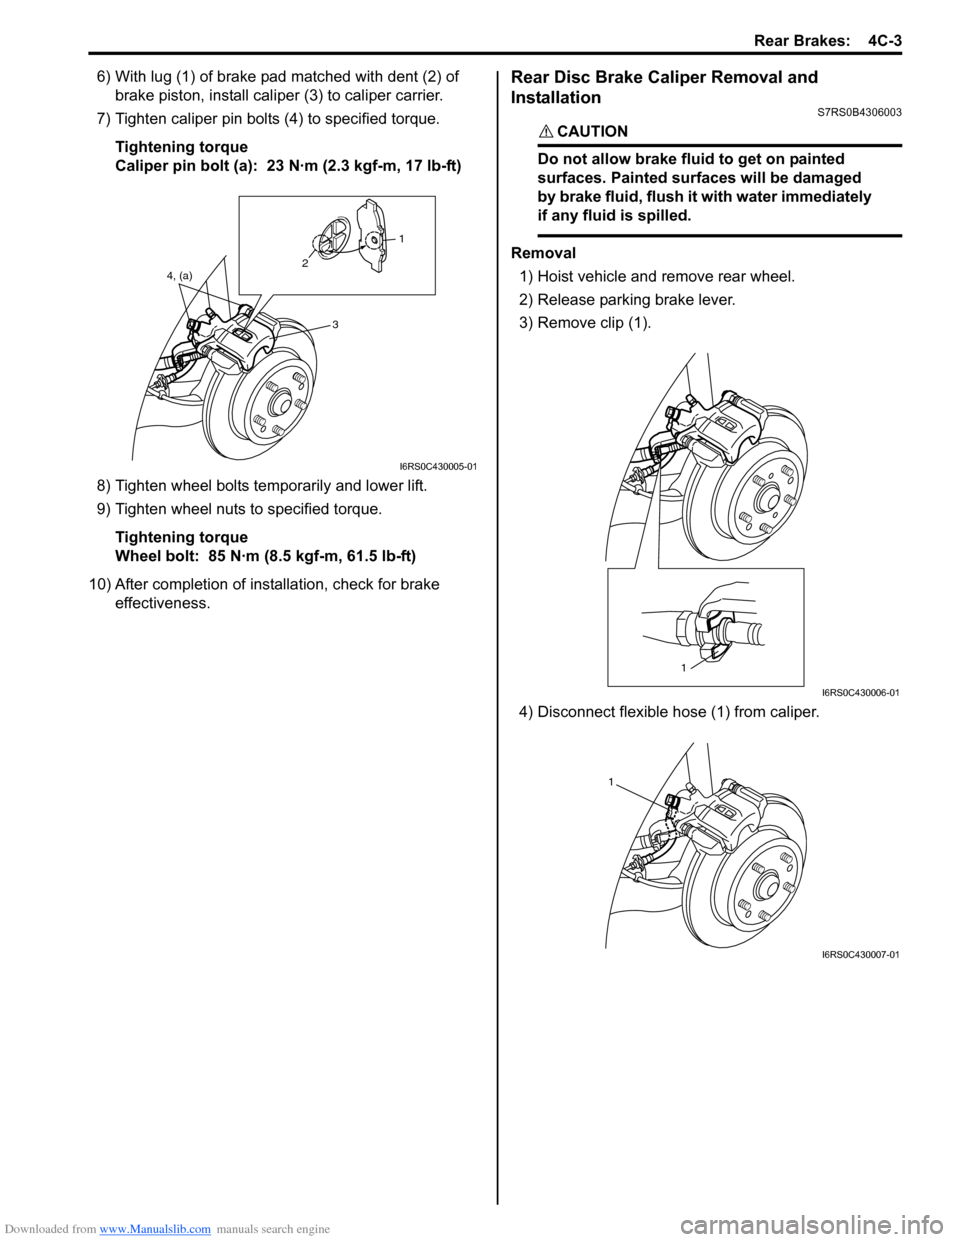 SUZUKI SWIFT 2006 2.G Service Workshop Manual Downloaded from www.Manualslib.com manuals search engine Rear Brakes:  4C-3
6) With lug (1) of brake pad matched with dent (2) of brake piston, install caliper  (3) to caliper carrier.
7) Tighten cali